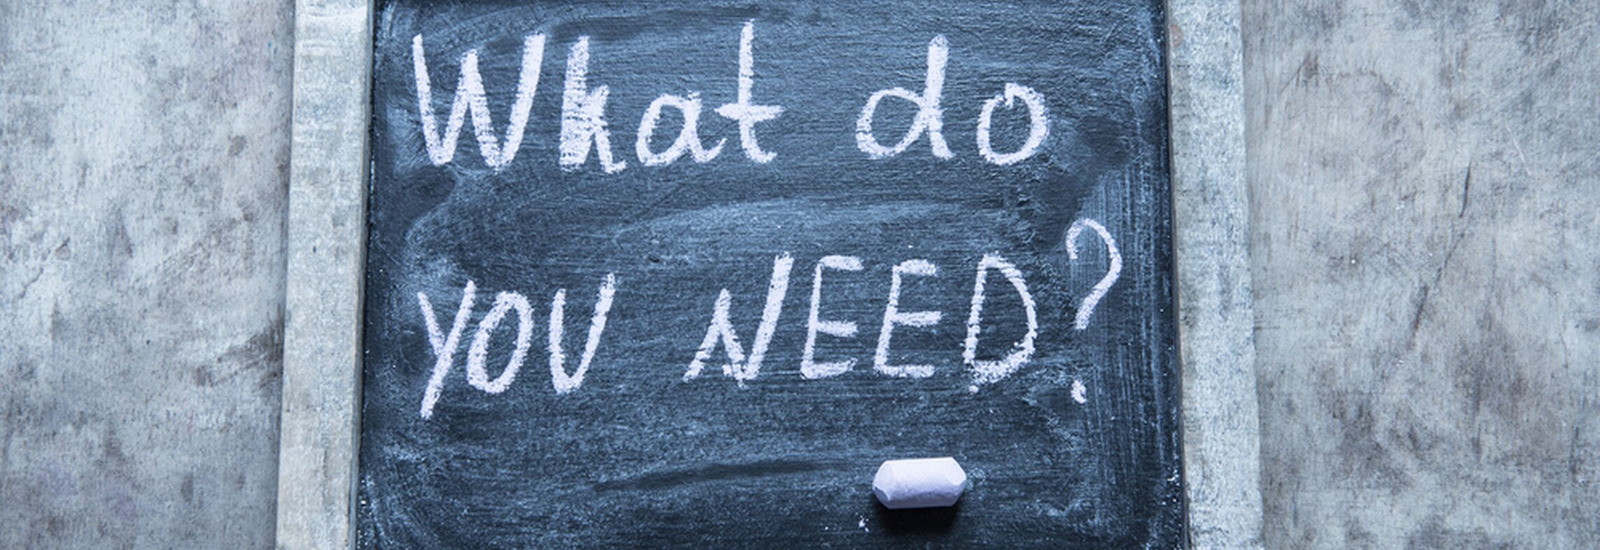 Sign with the words "What do you need" written in white chalk